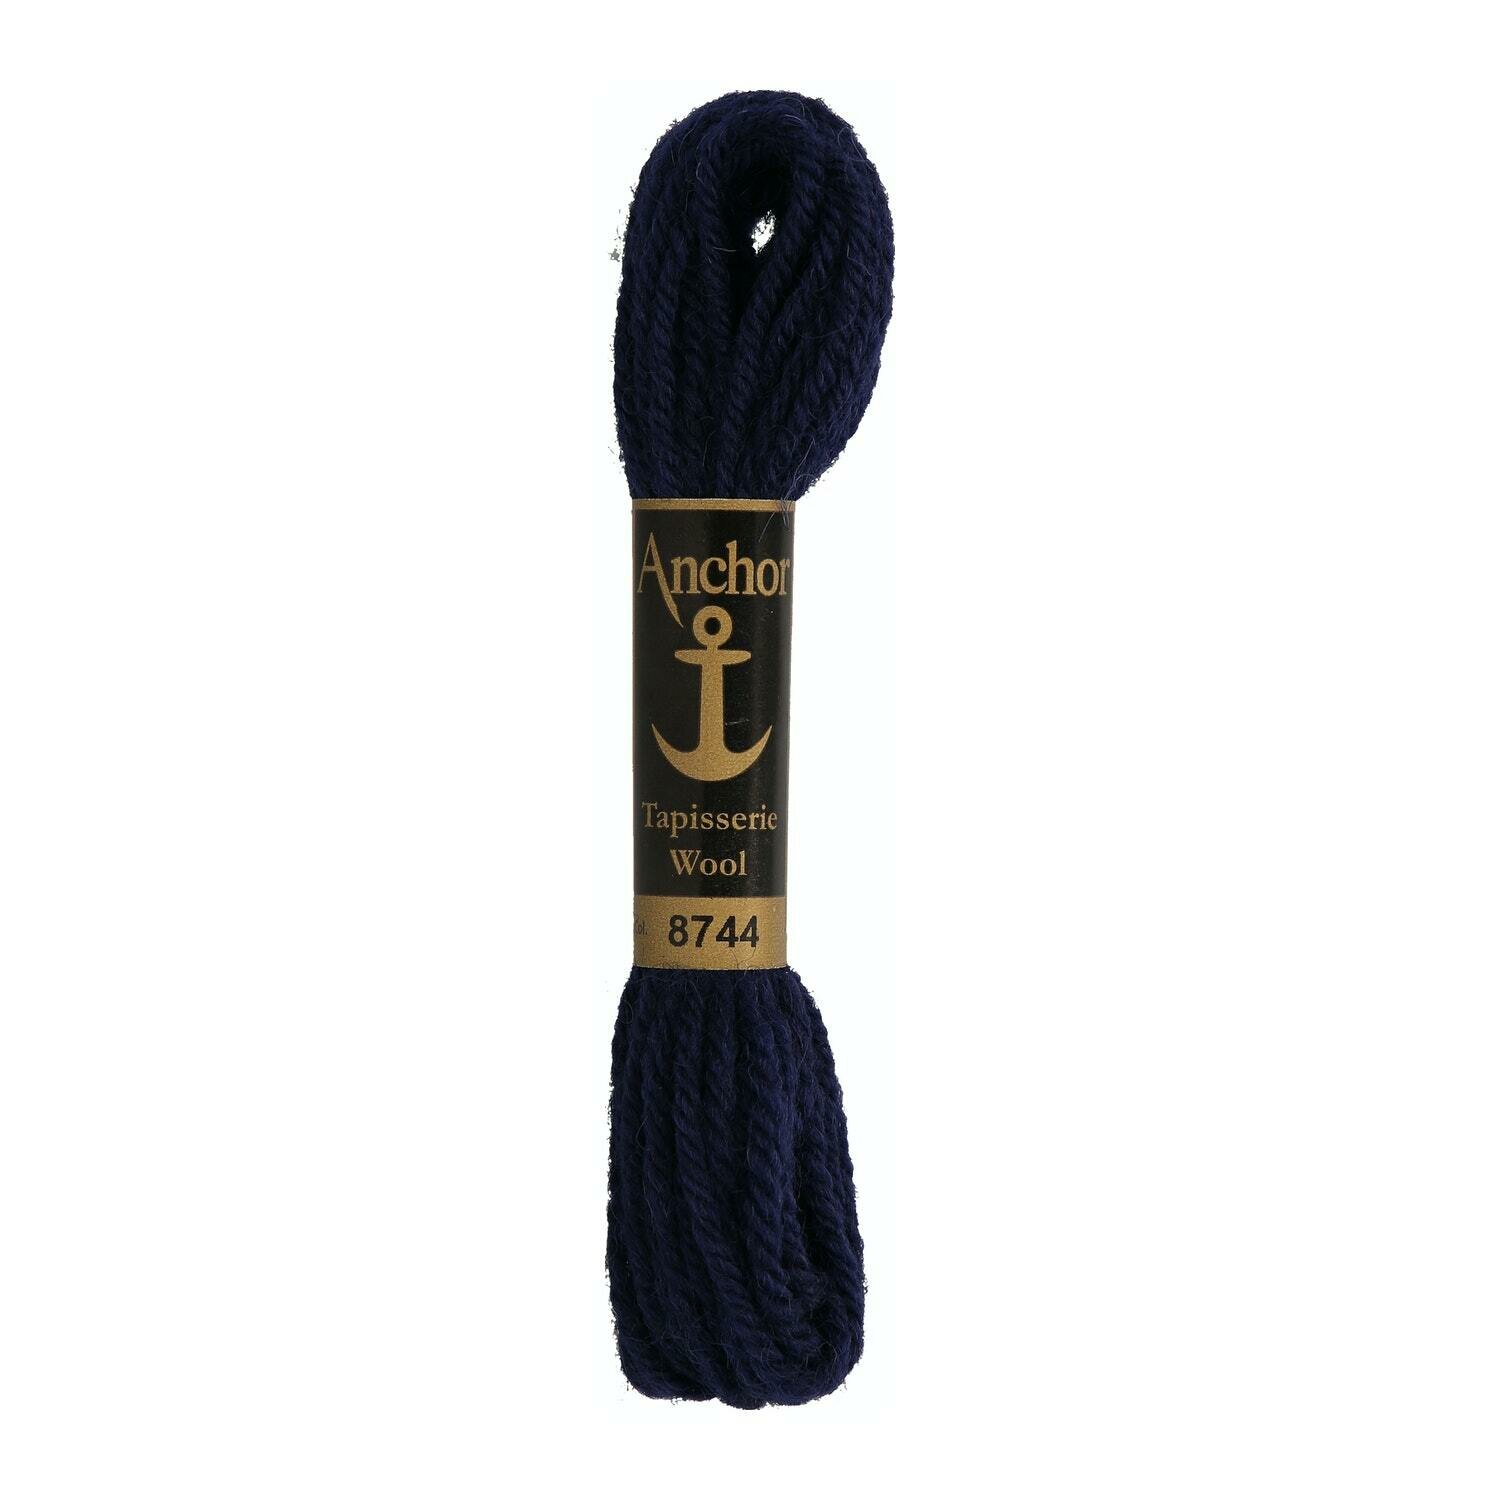 Anchor Tapisserie Wool # 08744